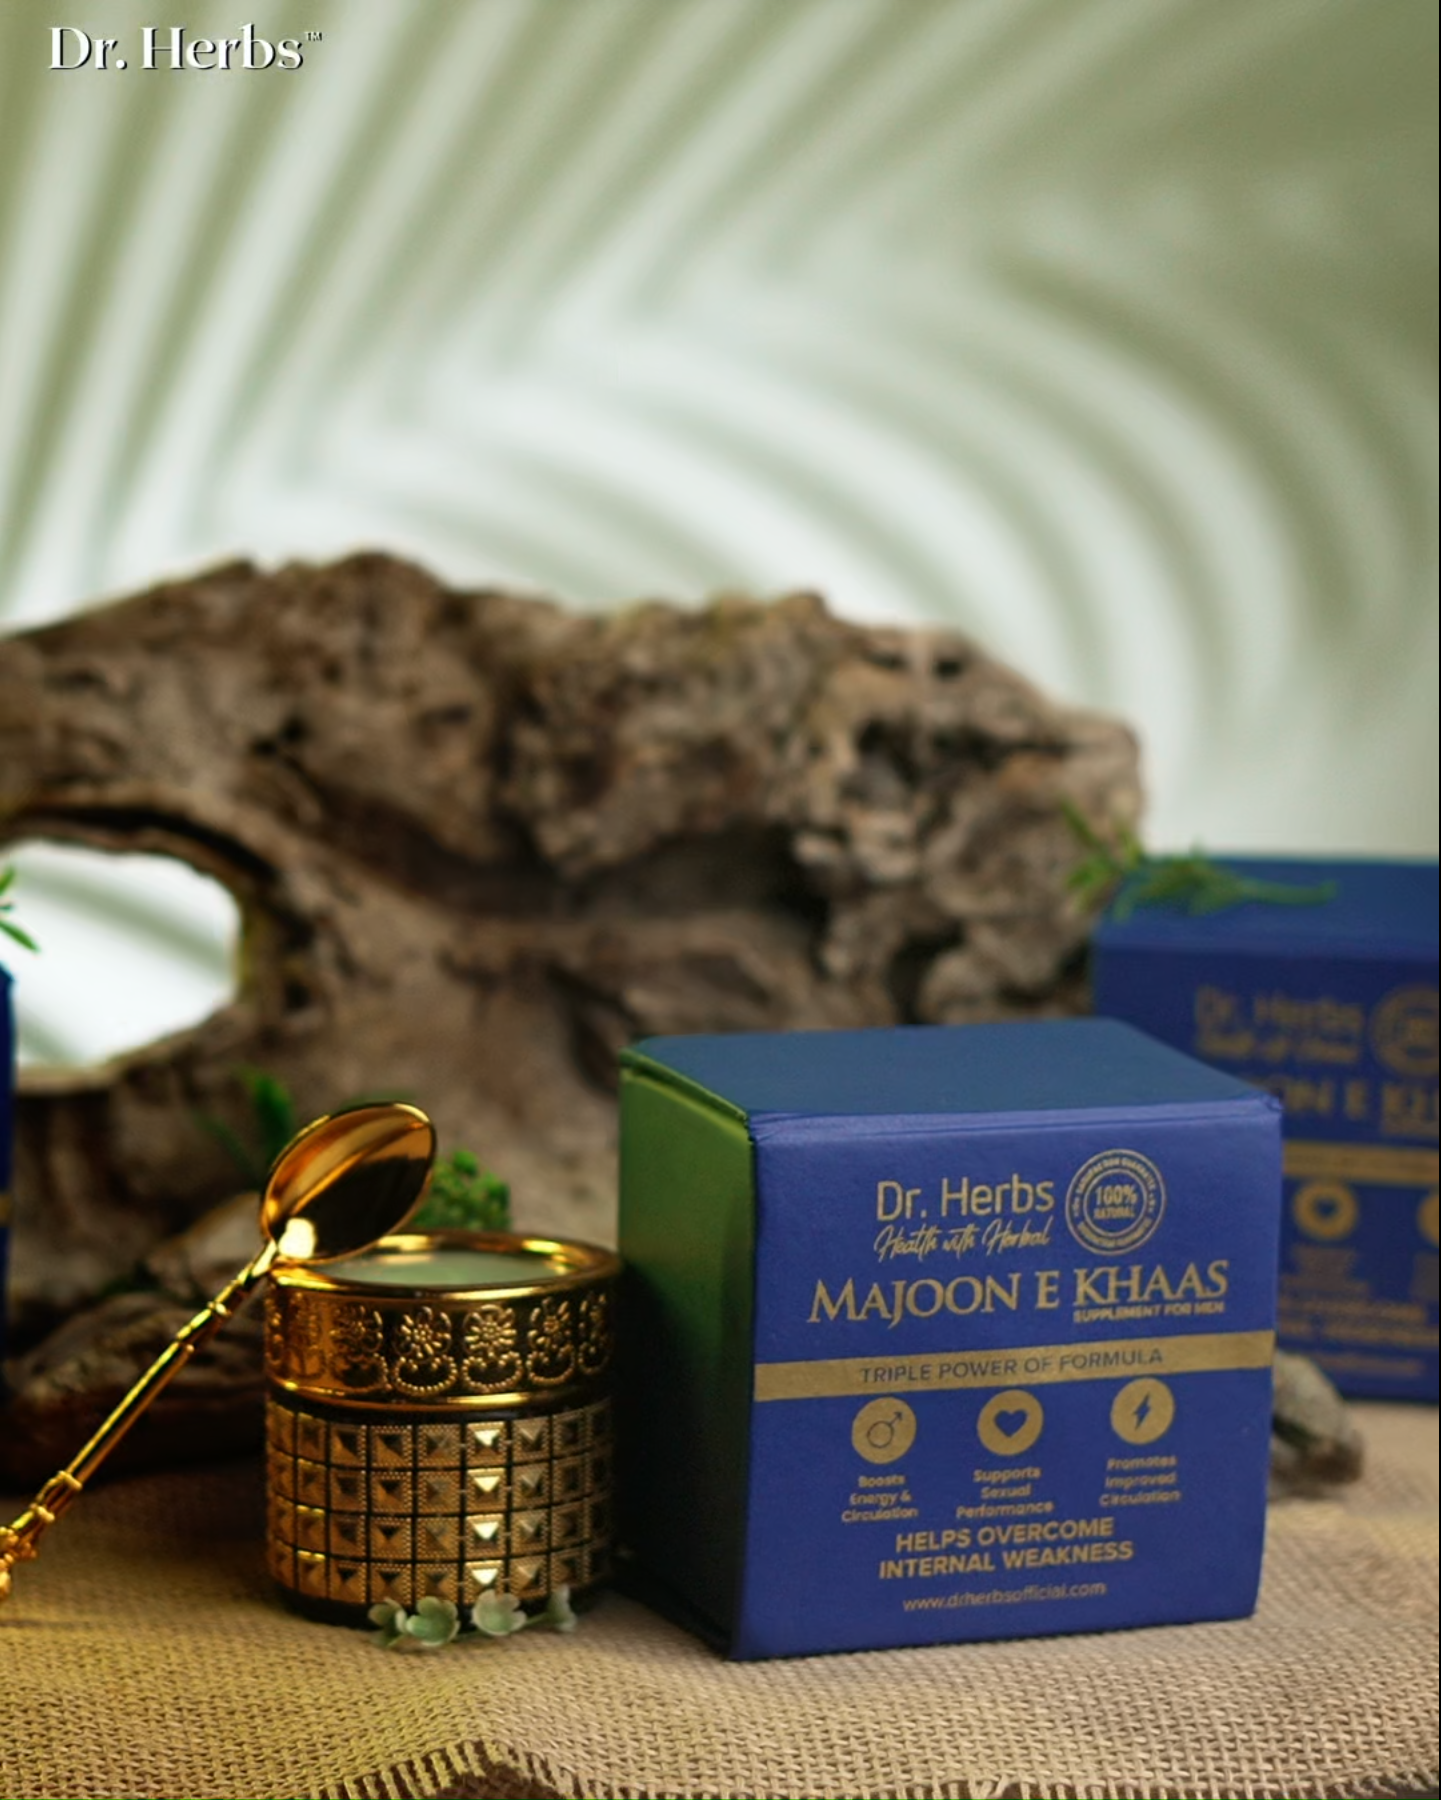 Herbal remedy Majoon e Khaas from Dr. Herbs, presented in a bottle with spoon and distinctive blue packaging.